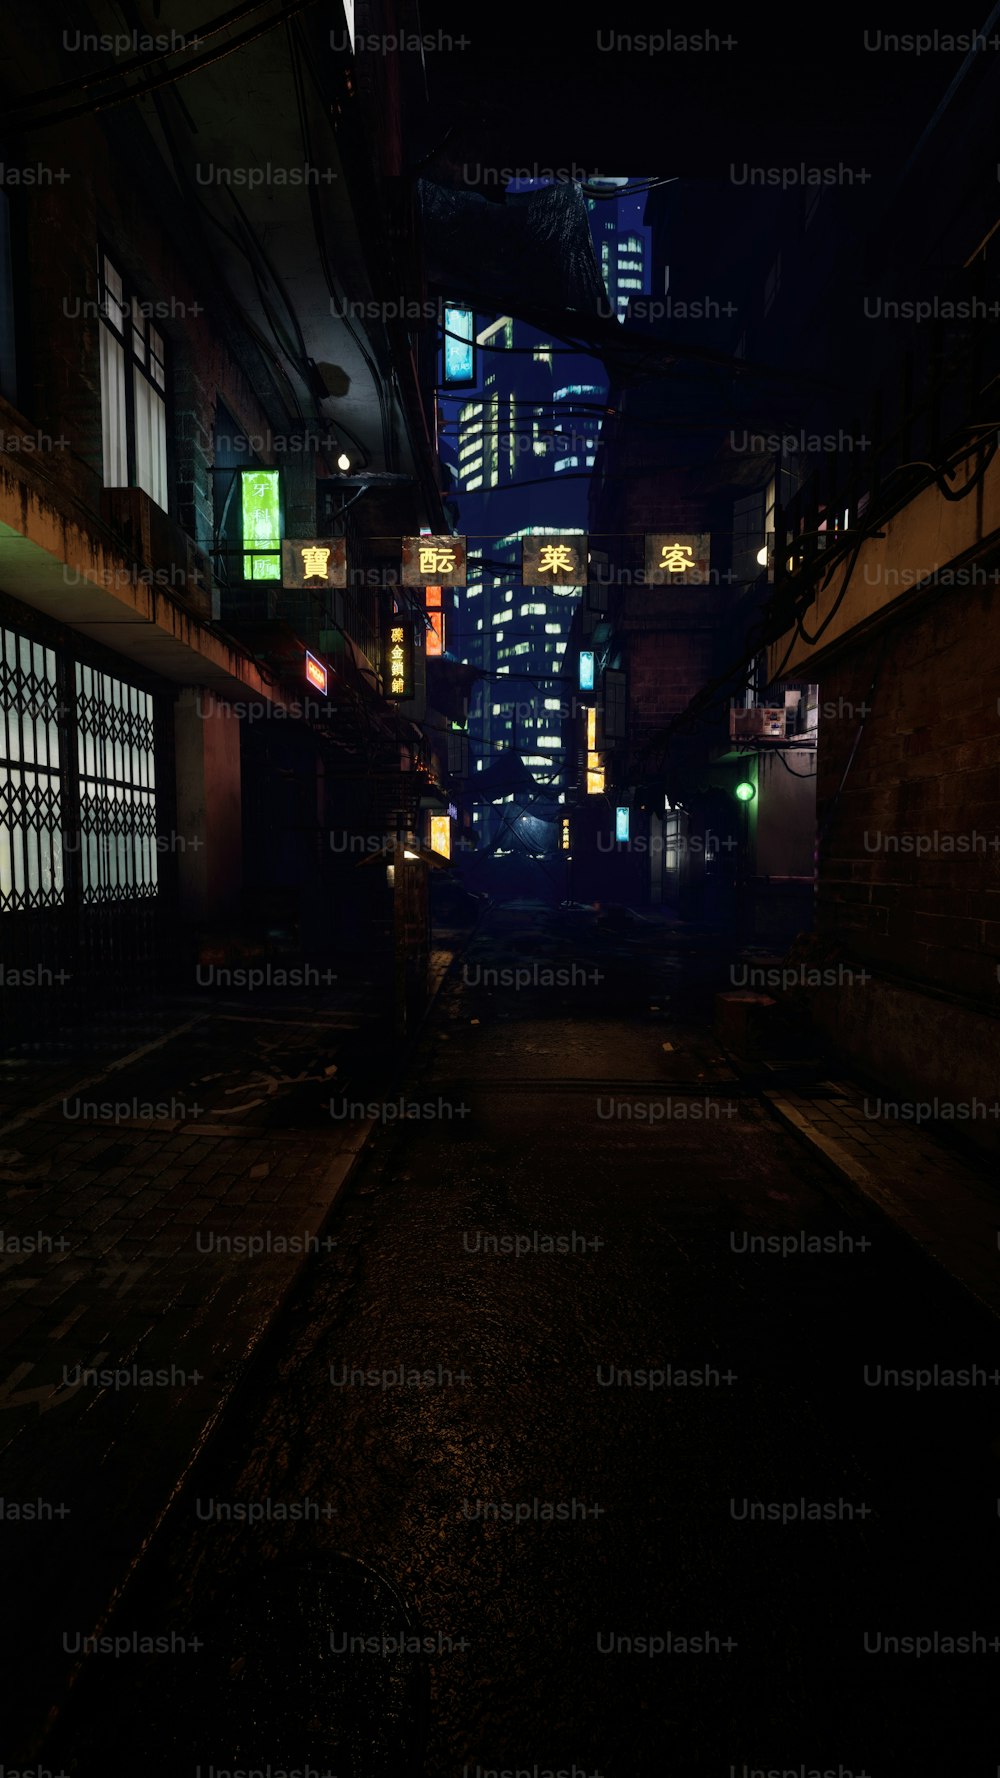 a dark alley way with buildings lit up at night